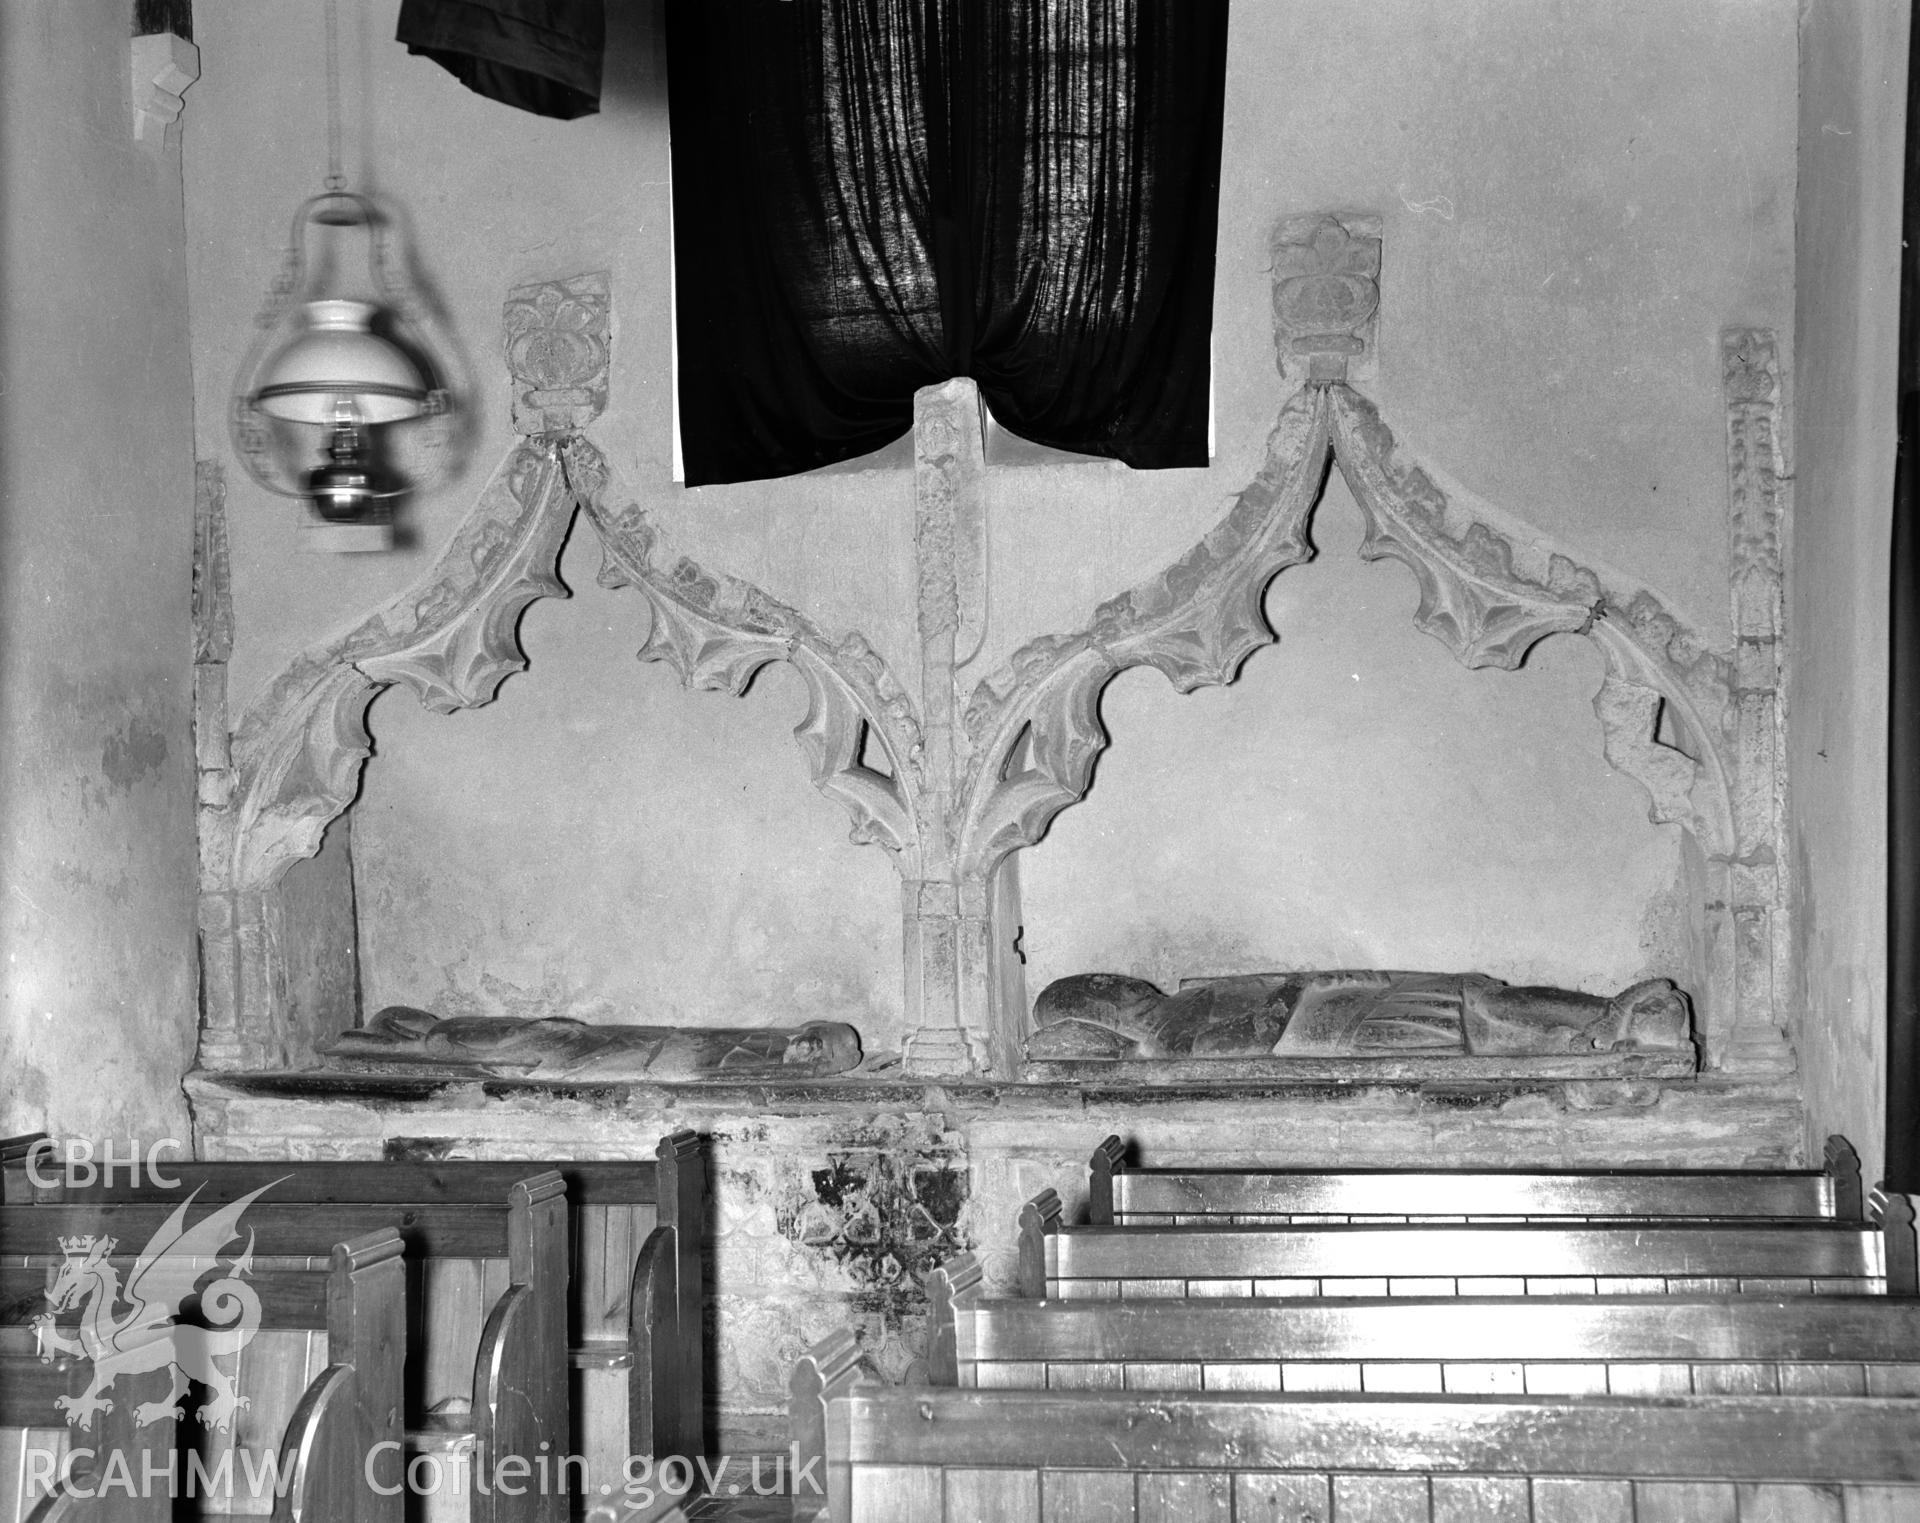 View of tombs in the north wall of Roche Chapel, Llangwm taken in 31.07.1941.